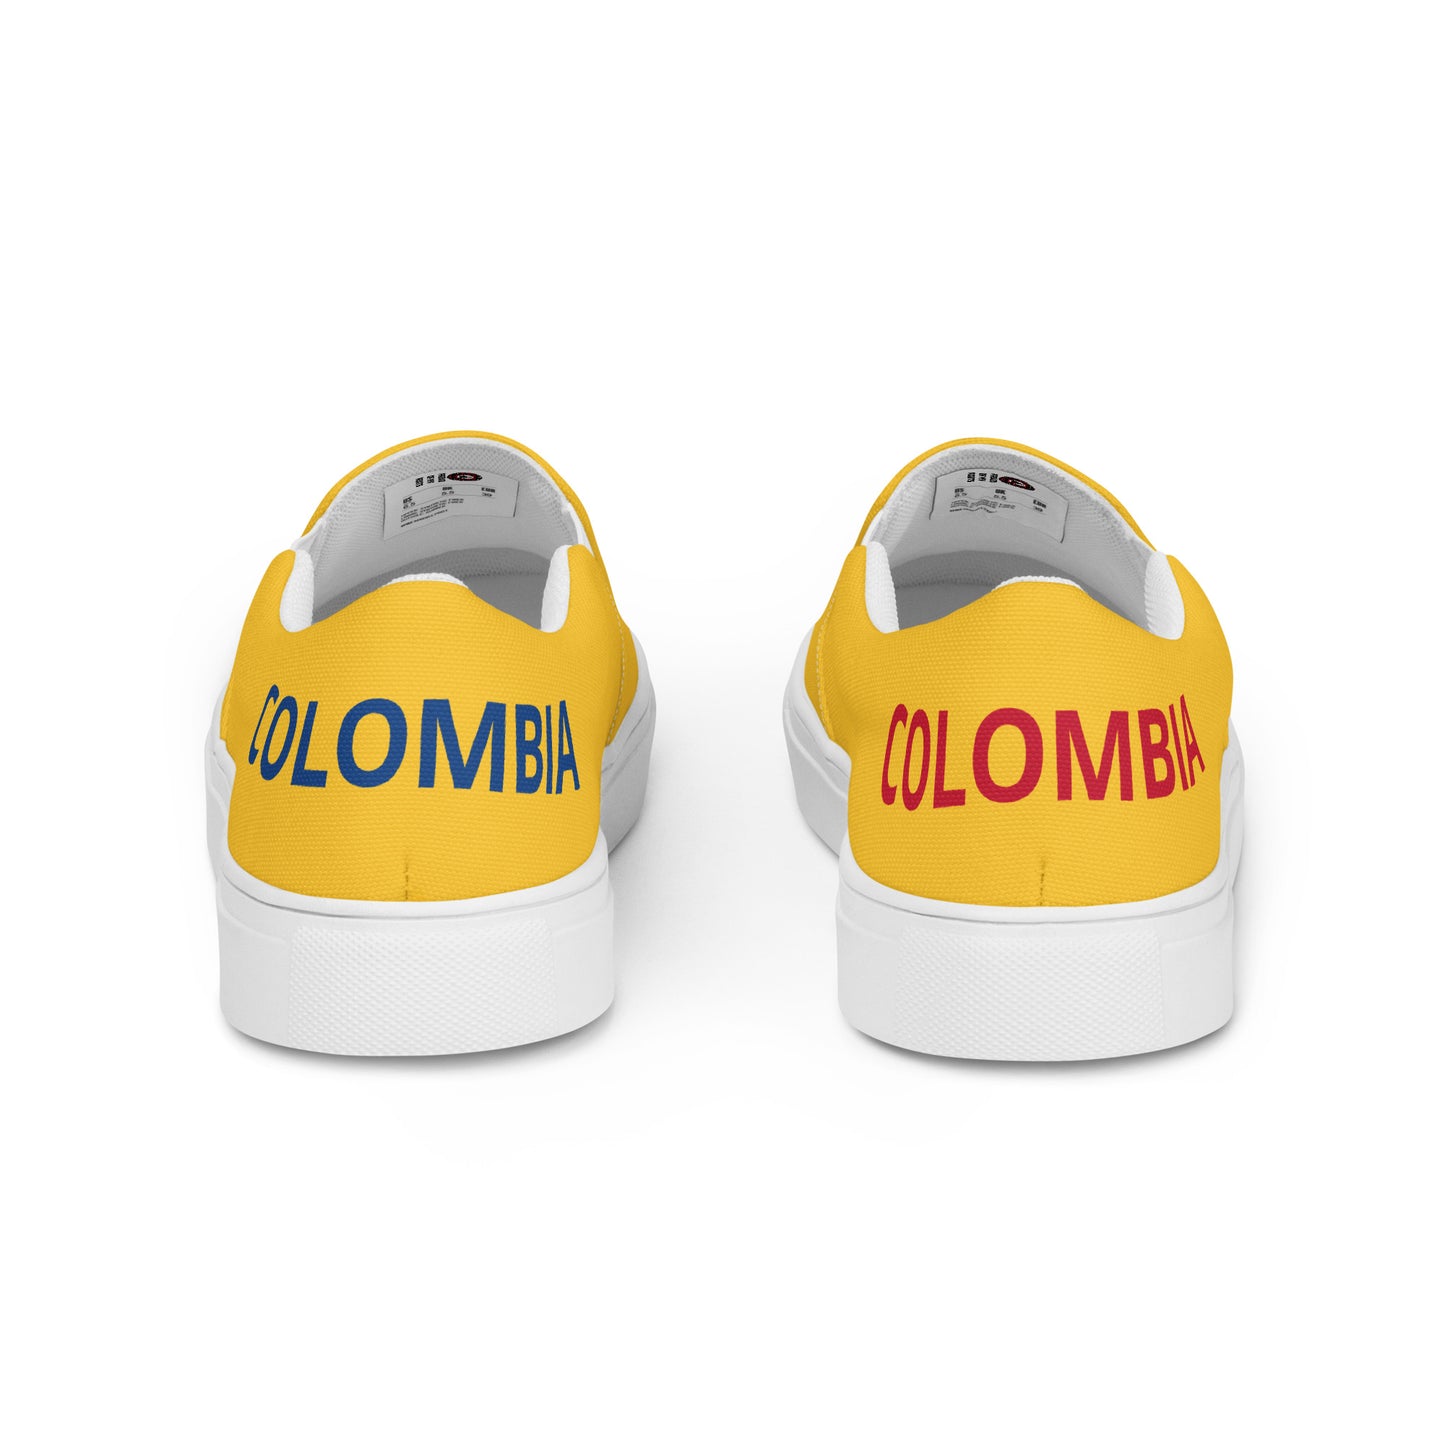 Colombia - Women - Yellow - Slip-on shoes